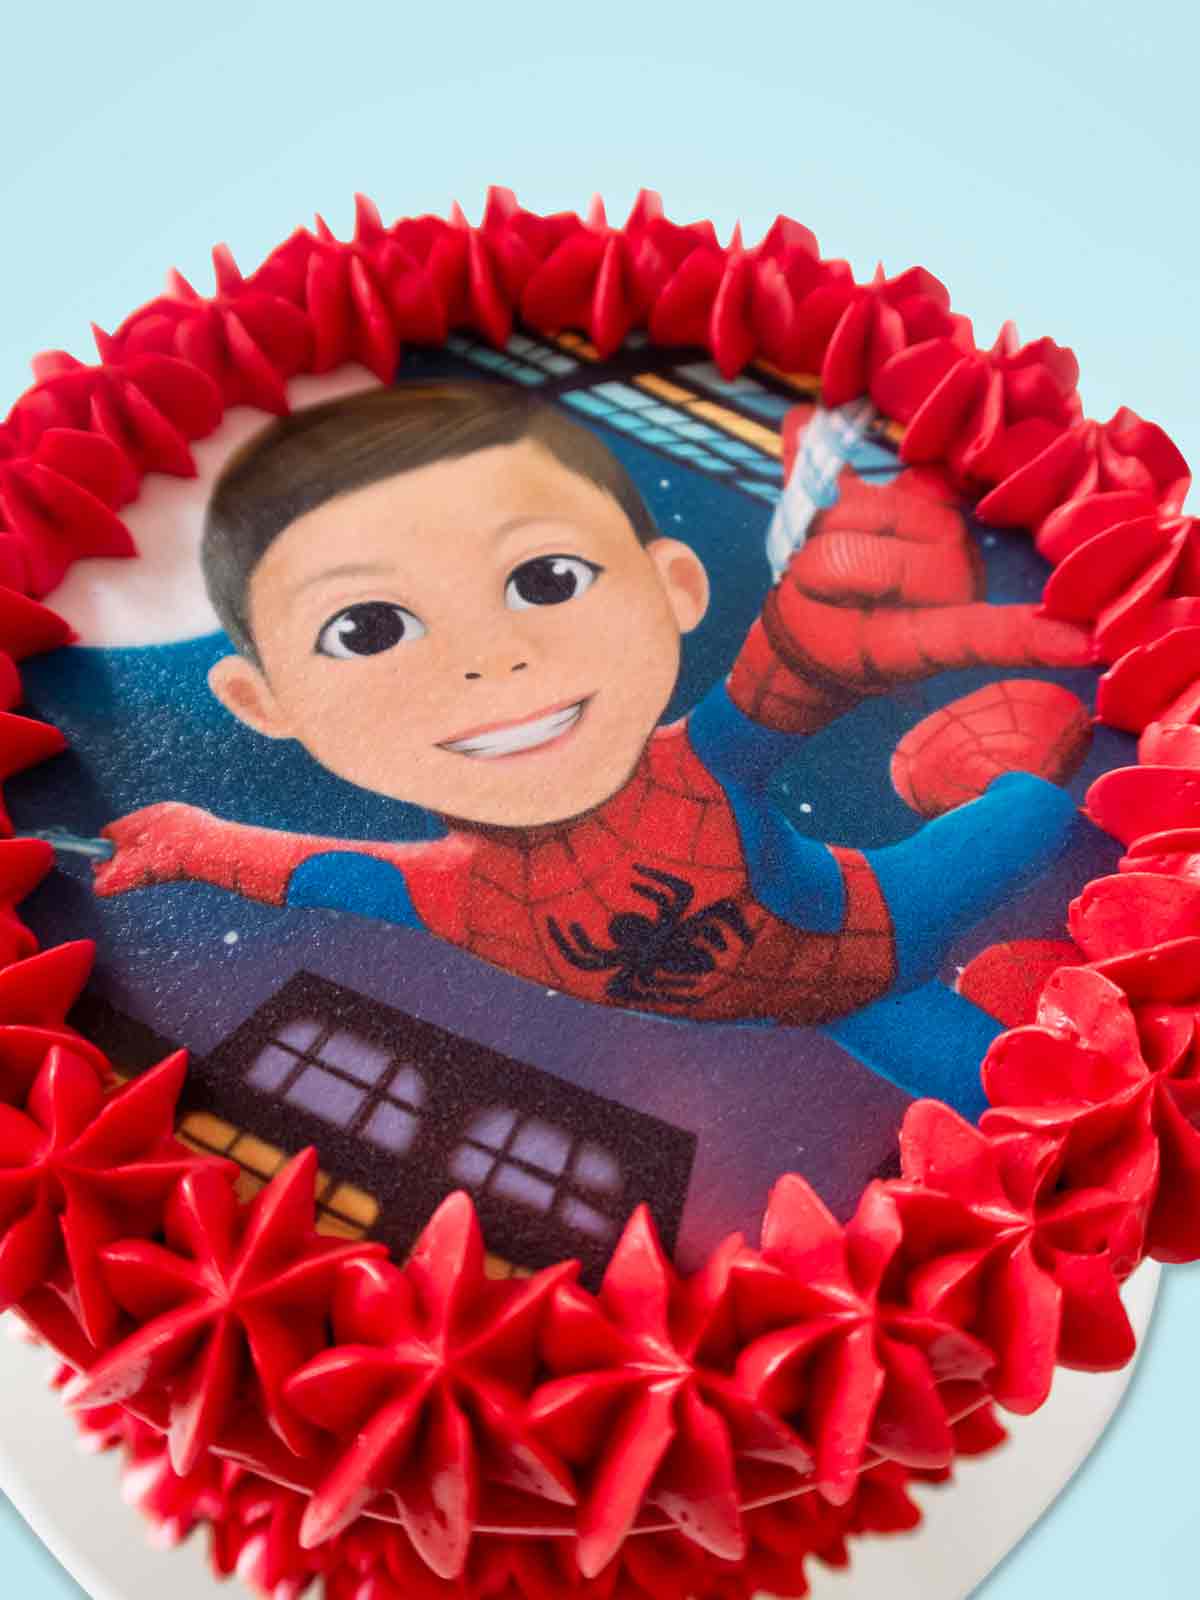 Personalised Spiderman Caricature Cake delivery London Surrey Berkshire